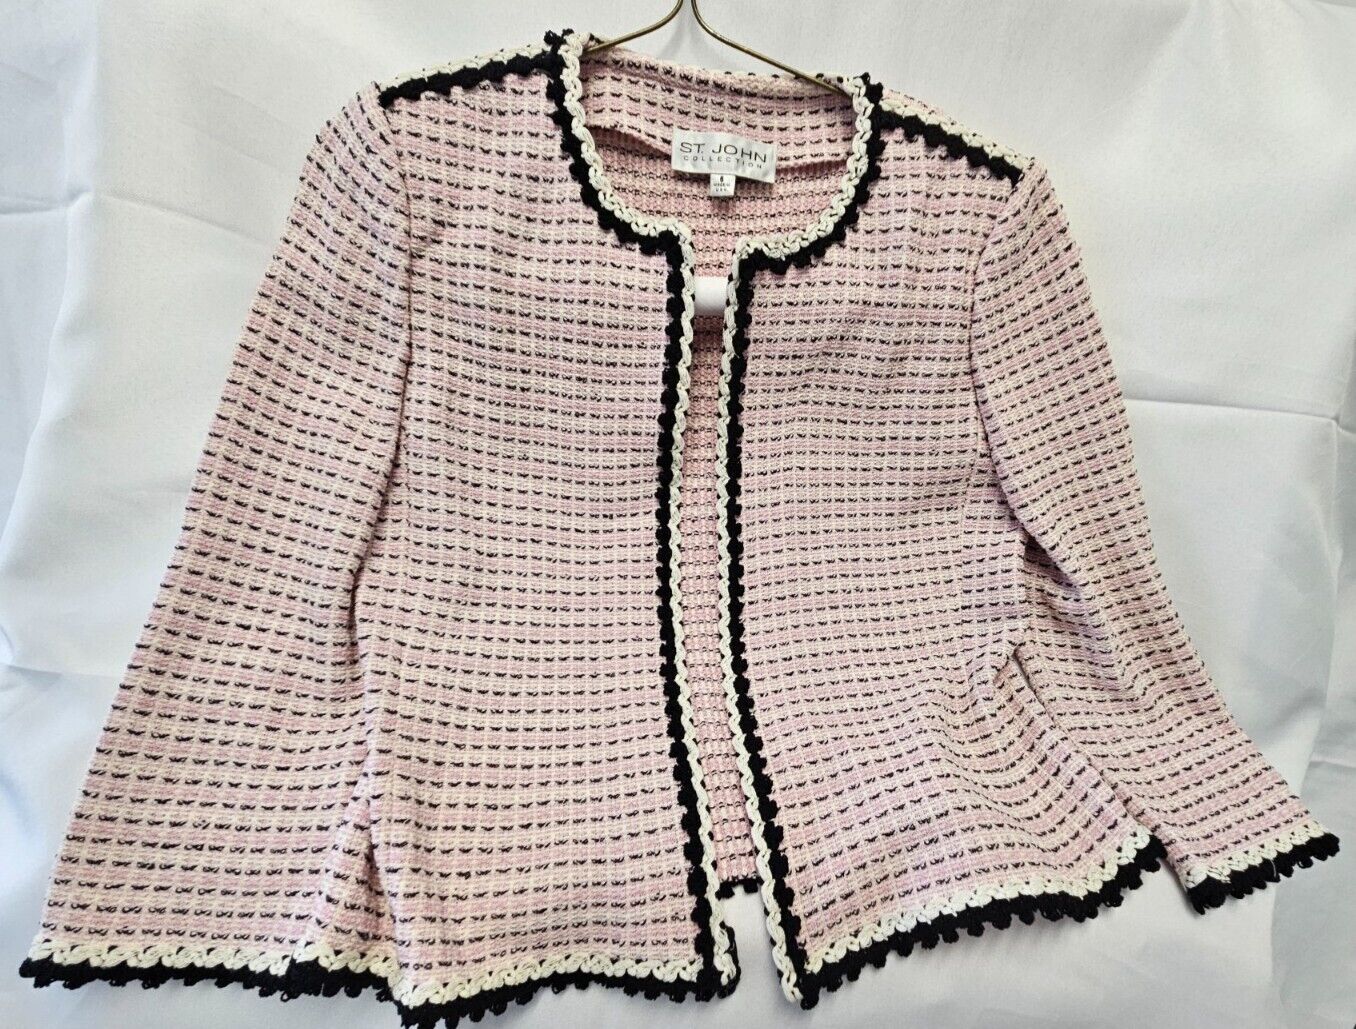 St. John Collection Women\'s Cardigan Jacket Size 6. Very Good Condition